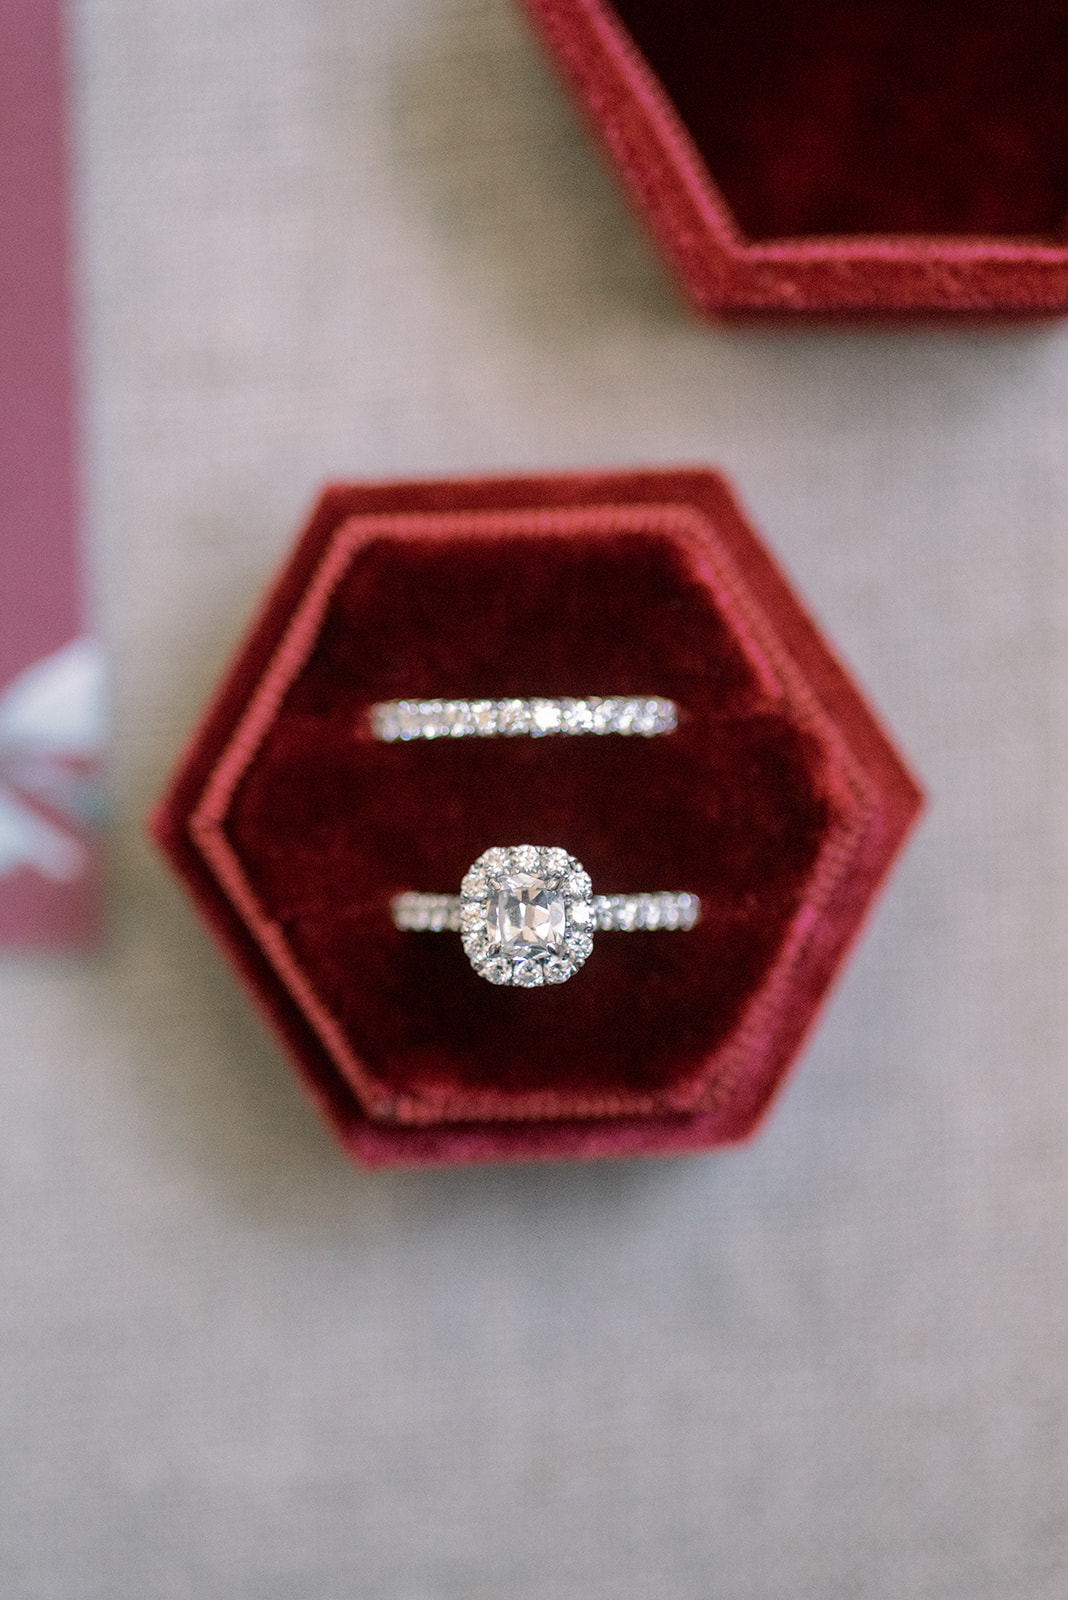 Pennsylvania wedding photographer captures red ring box with ring sitting inside